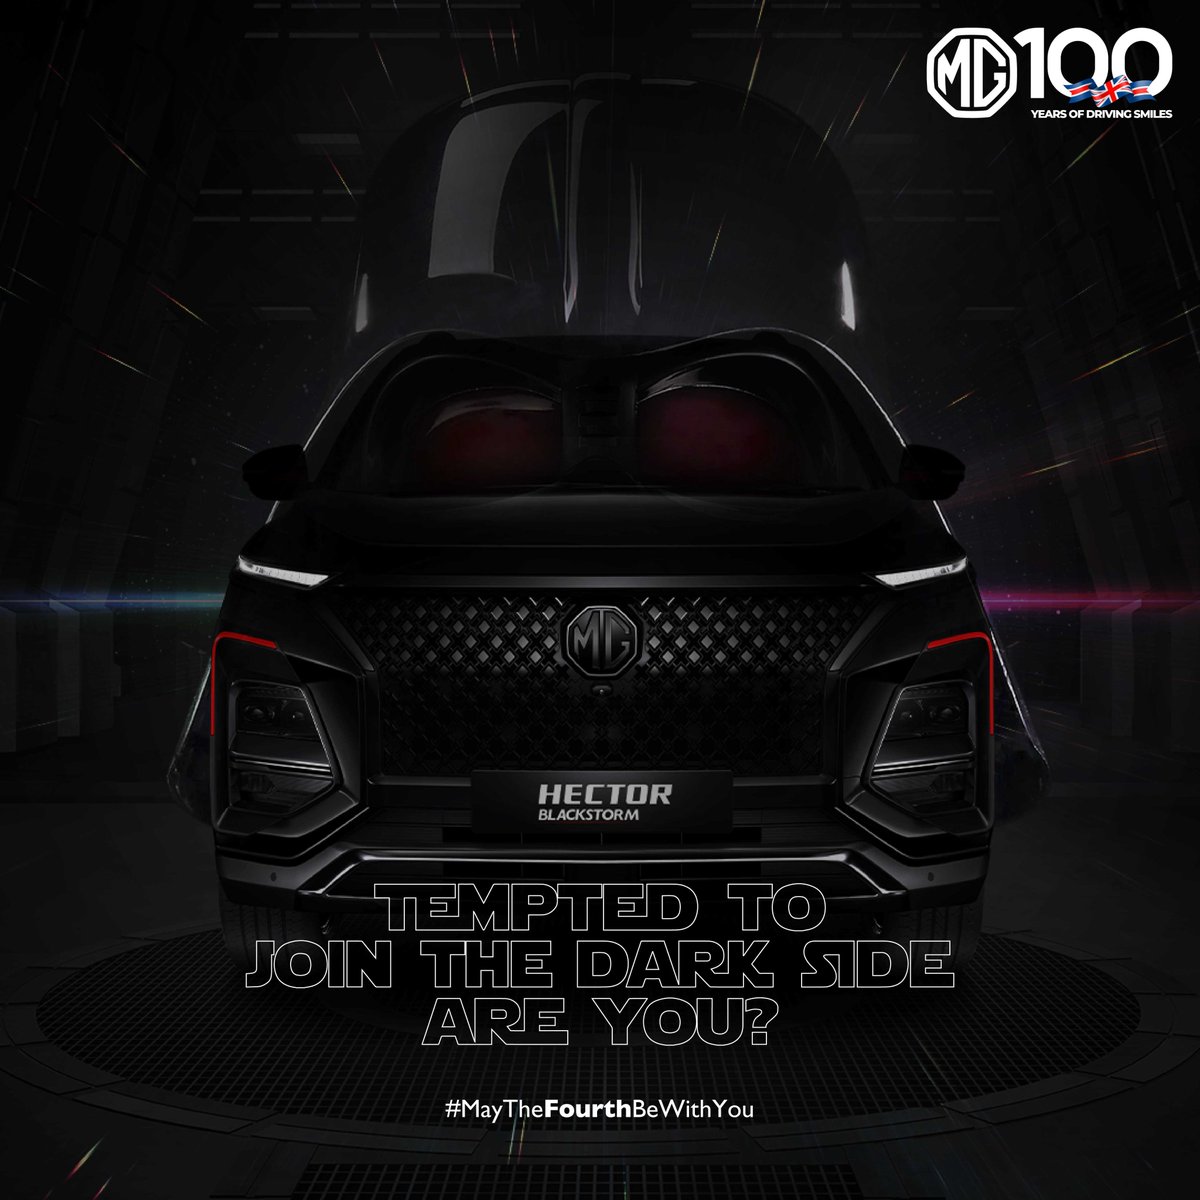 Even the force won’t be able to keep you away from wanting the MG Hector Blackstorm. Book a test drive and you will know the circle is complete. #MayThe4thBeWithYou #StarWarsDay #MGHectorBlackstorm #MorrisGaragesIndia #MGMotorIndia